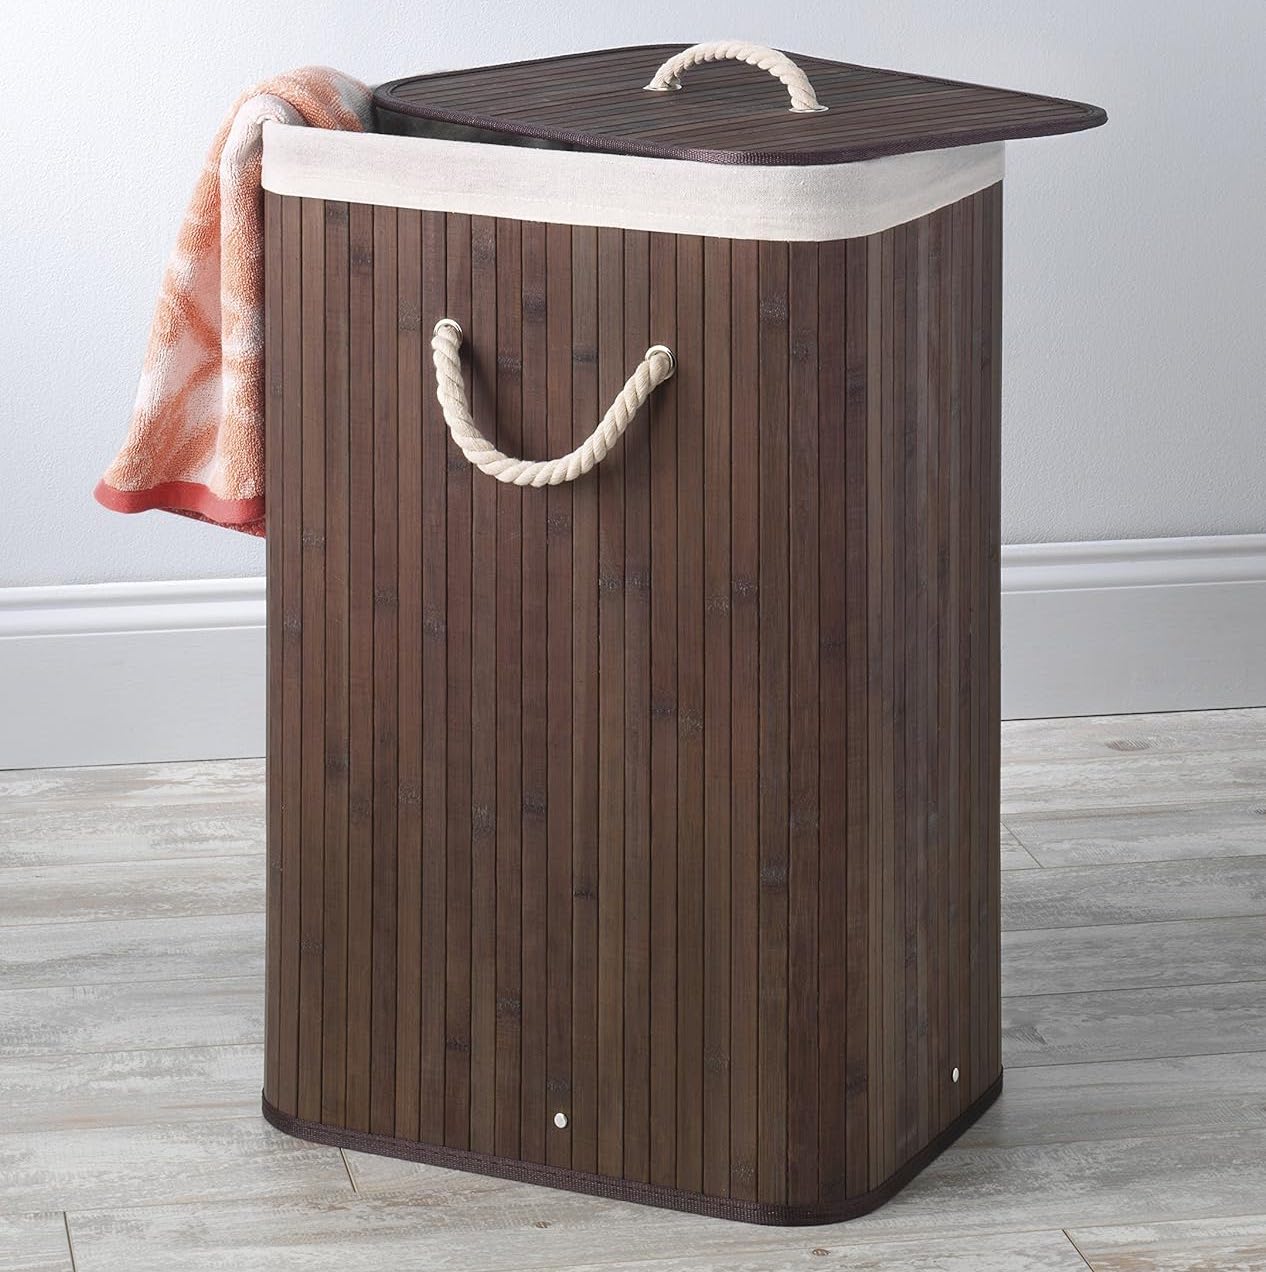 BlushBees® Laundry Hamper with Lid, Large Foldable, made with Natural Bamboo Laundry Basket.